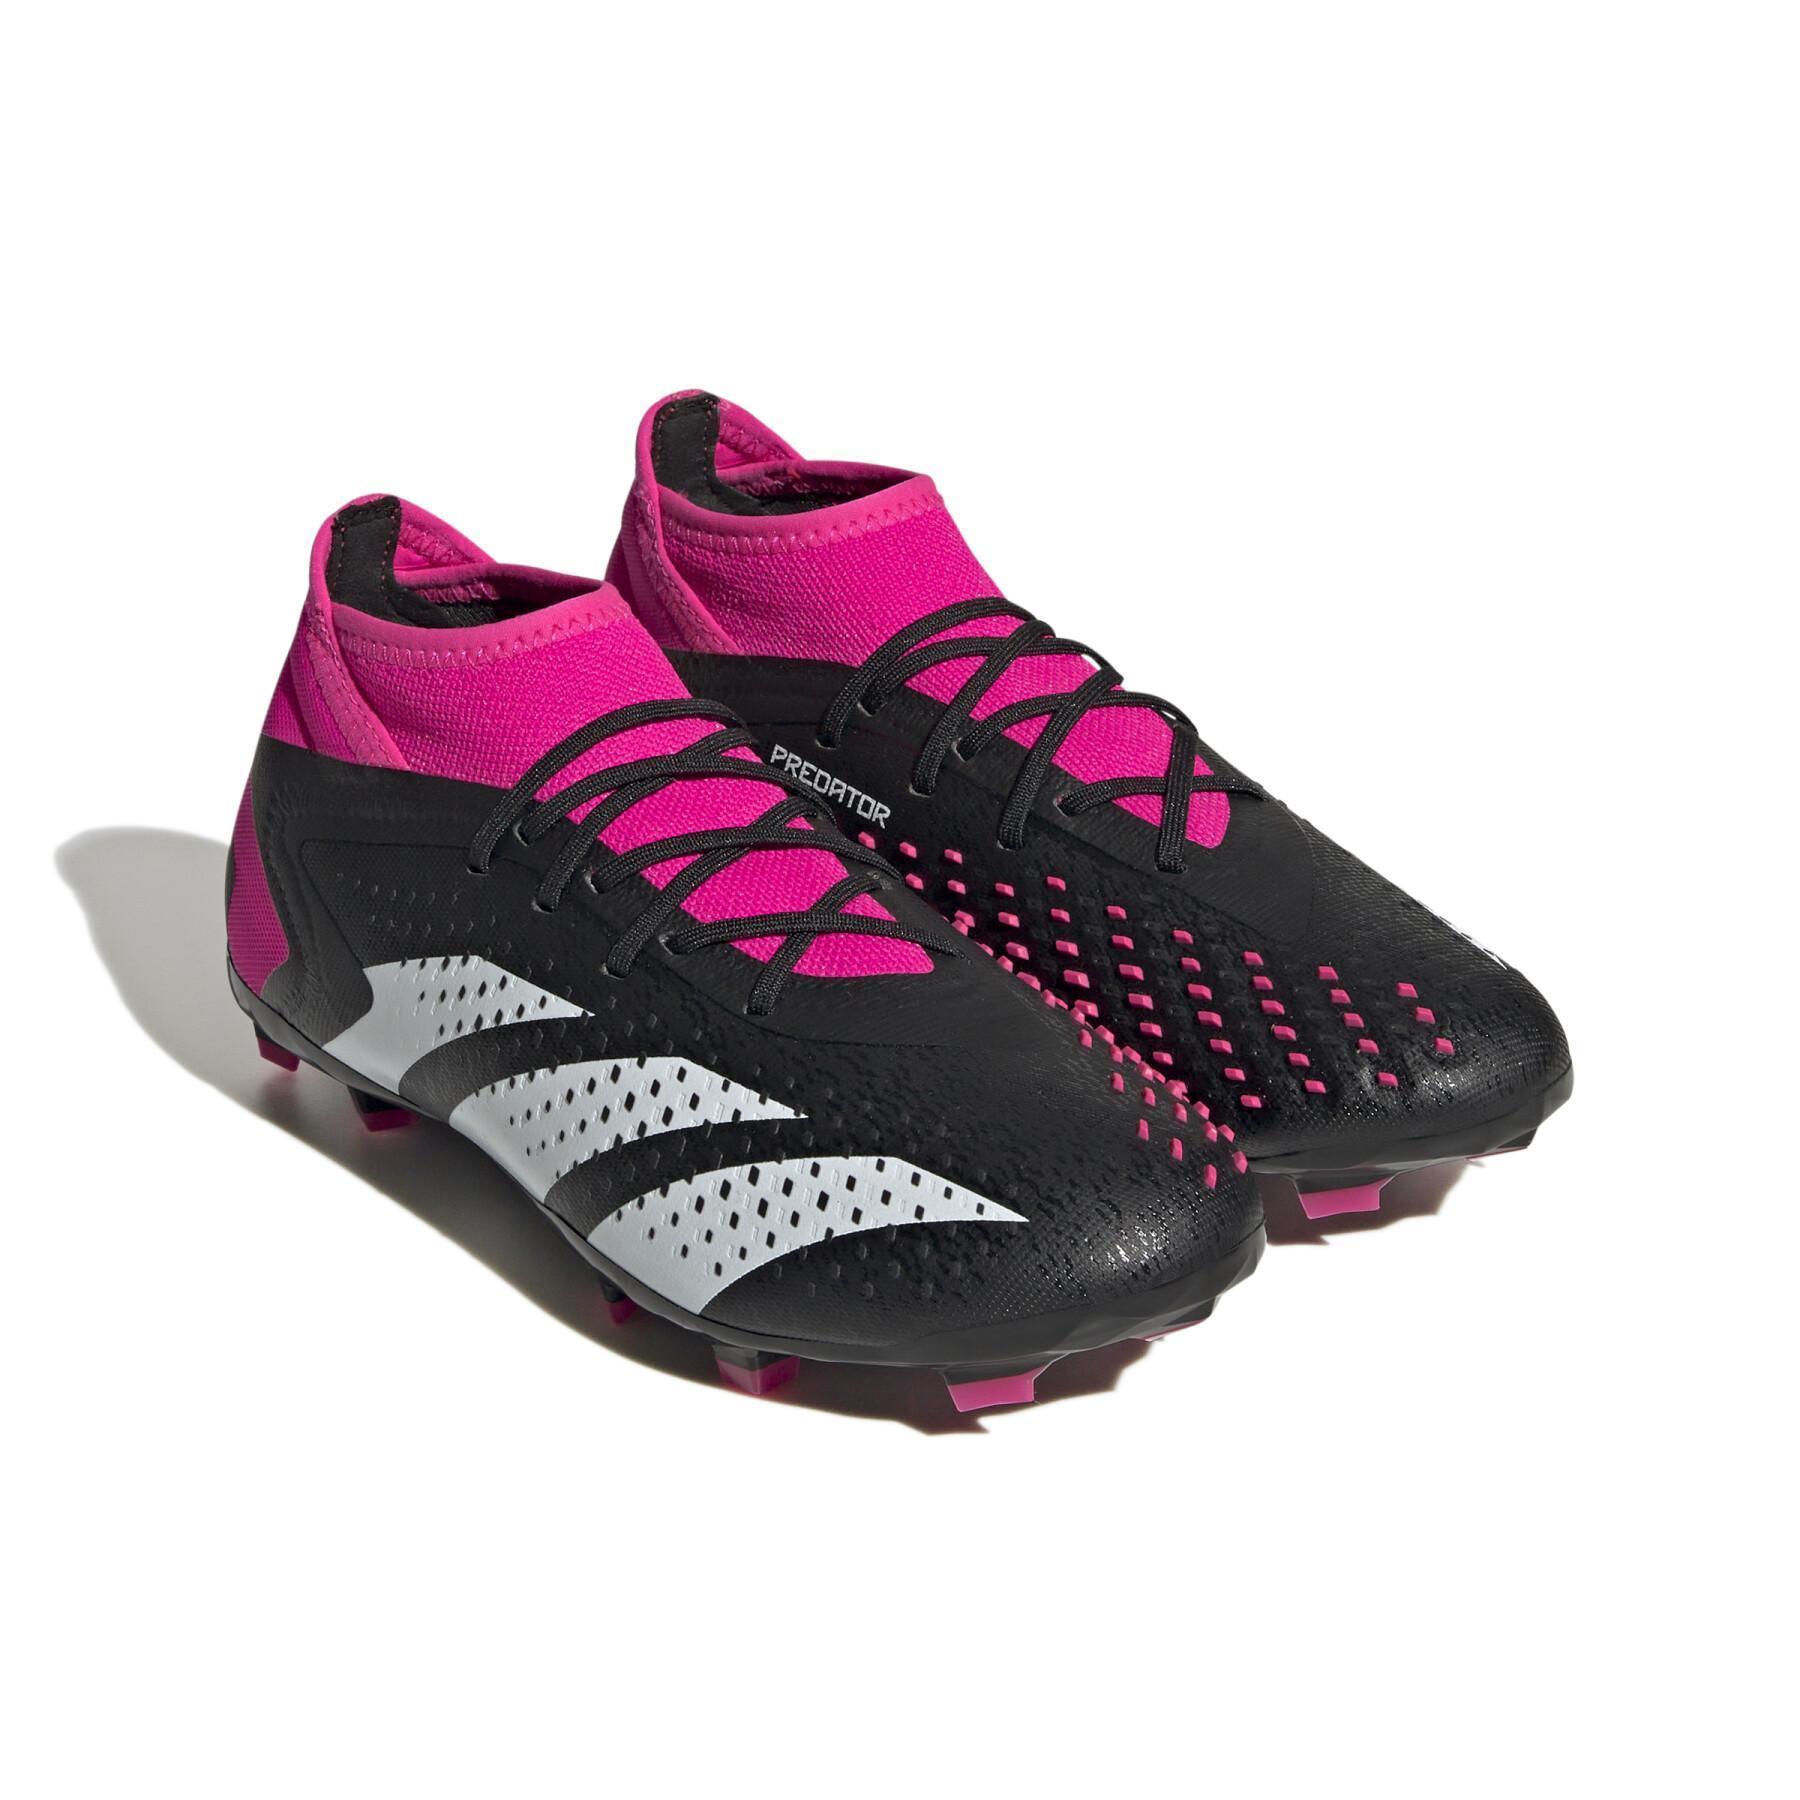 Children's soccer shoes adidas Predator Accuracy.1 - Own your Football